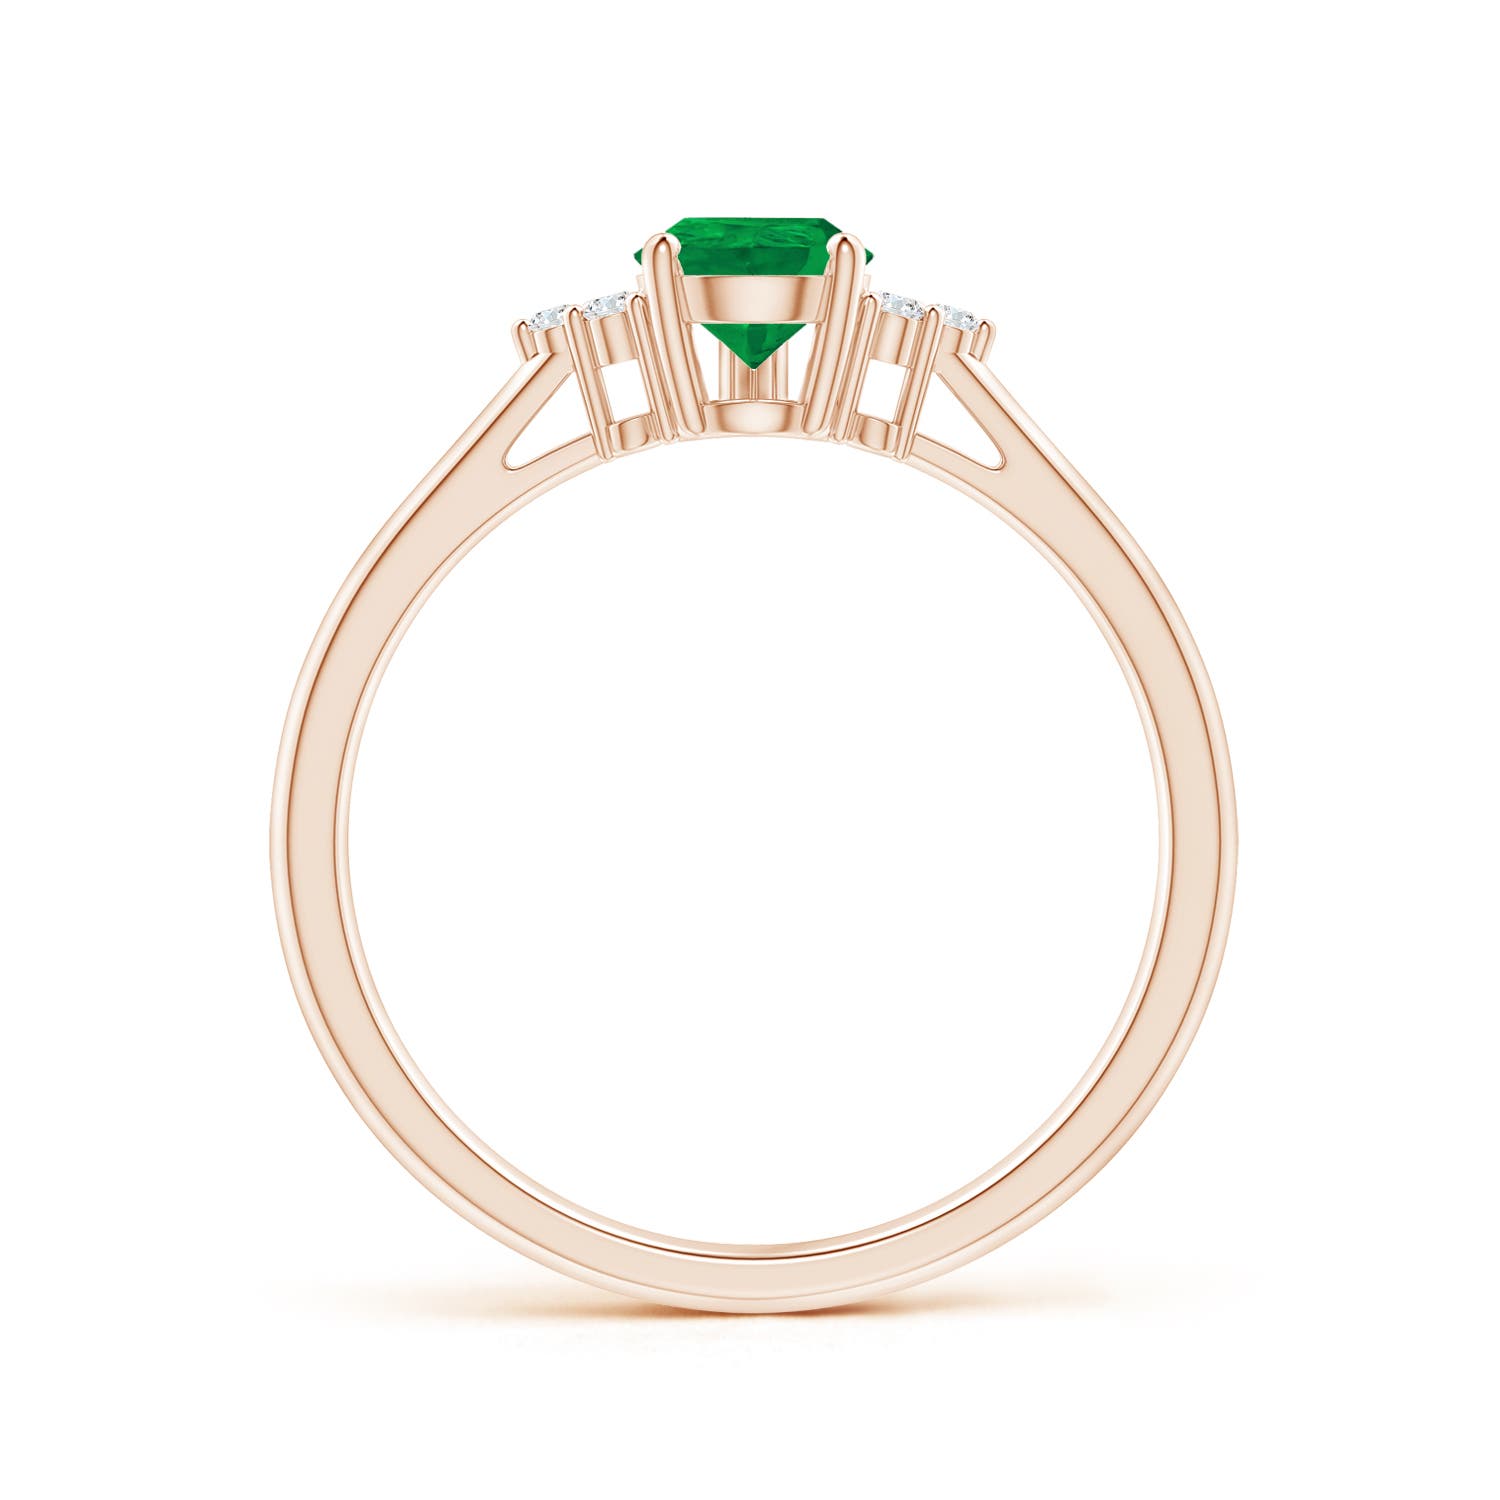 AA - Emerald / 0.66 CT / 14 KT Rose Gold